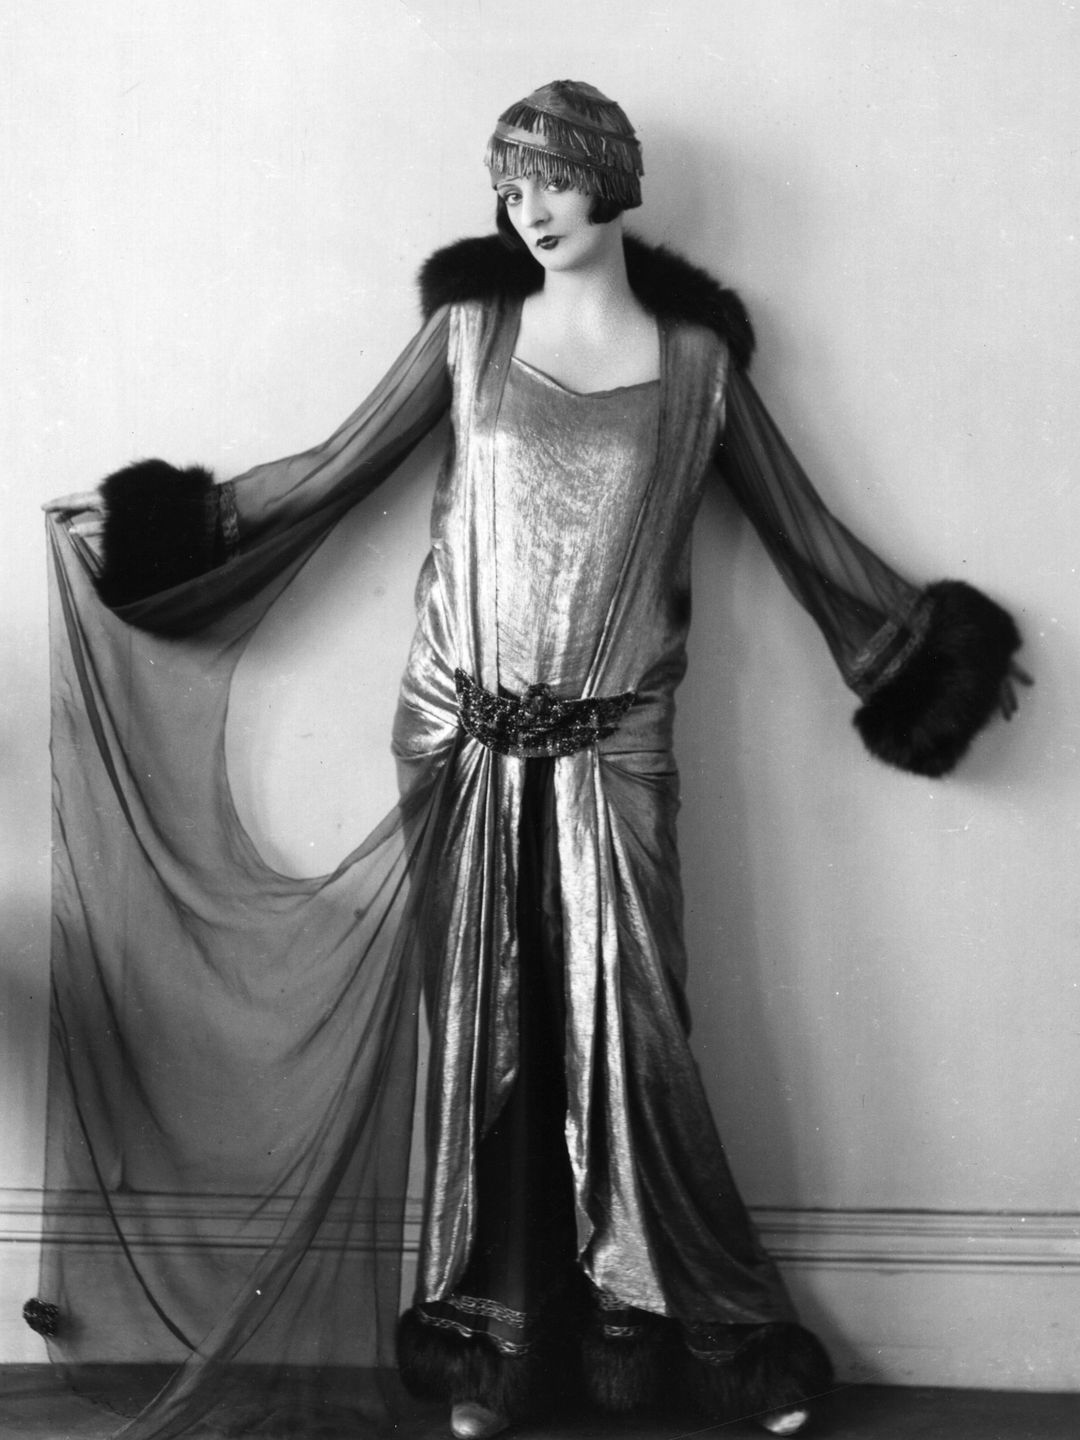 English actress Elsie Randolph dressed in stunning eveningwear designed by Norman Hartnell.